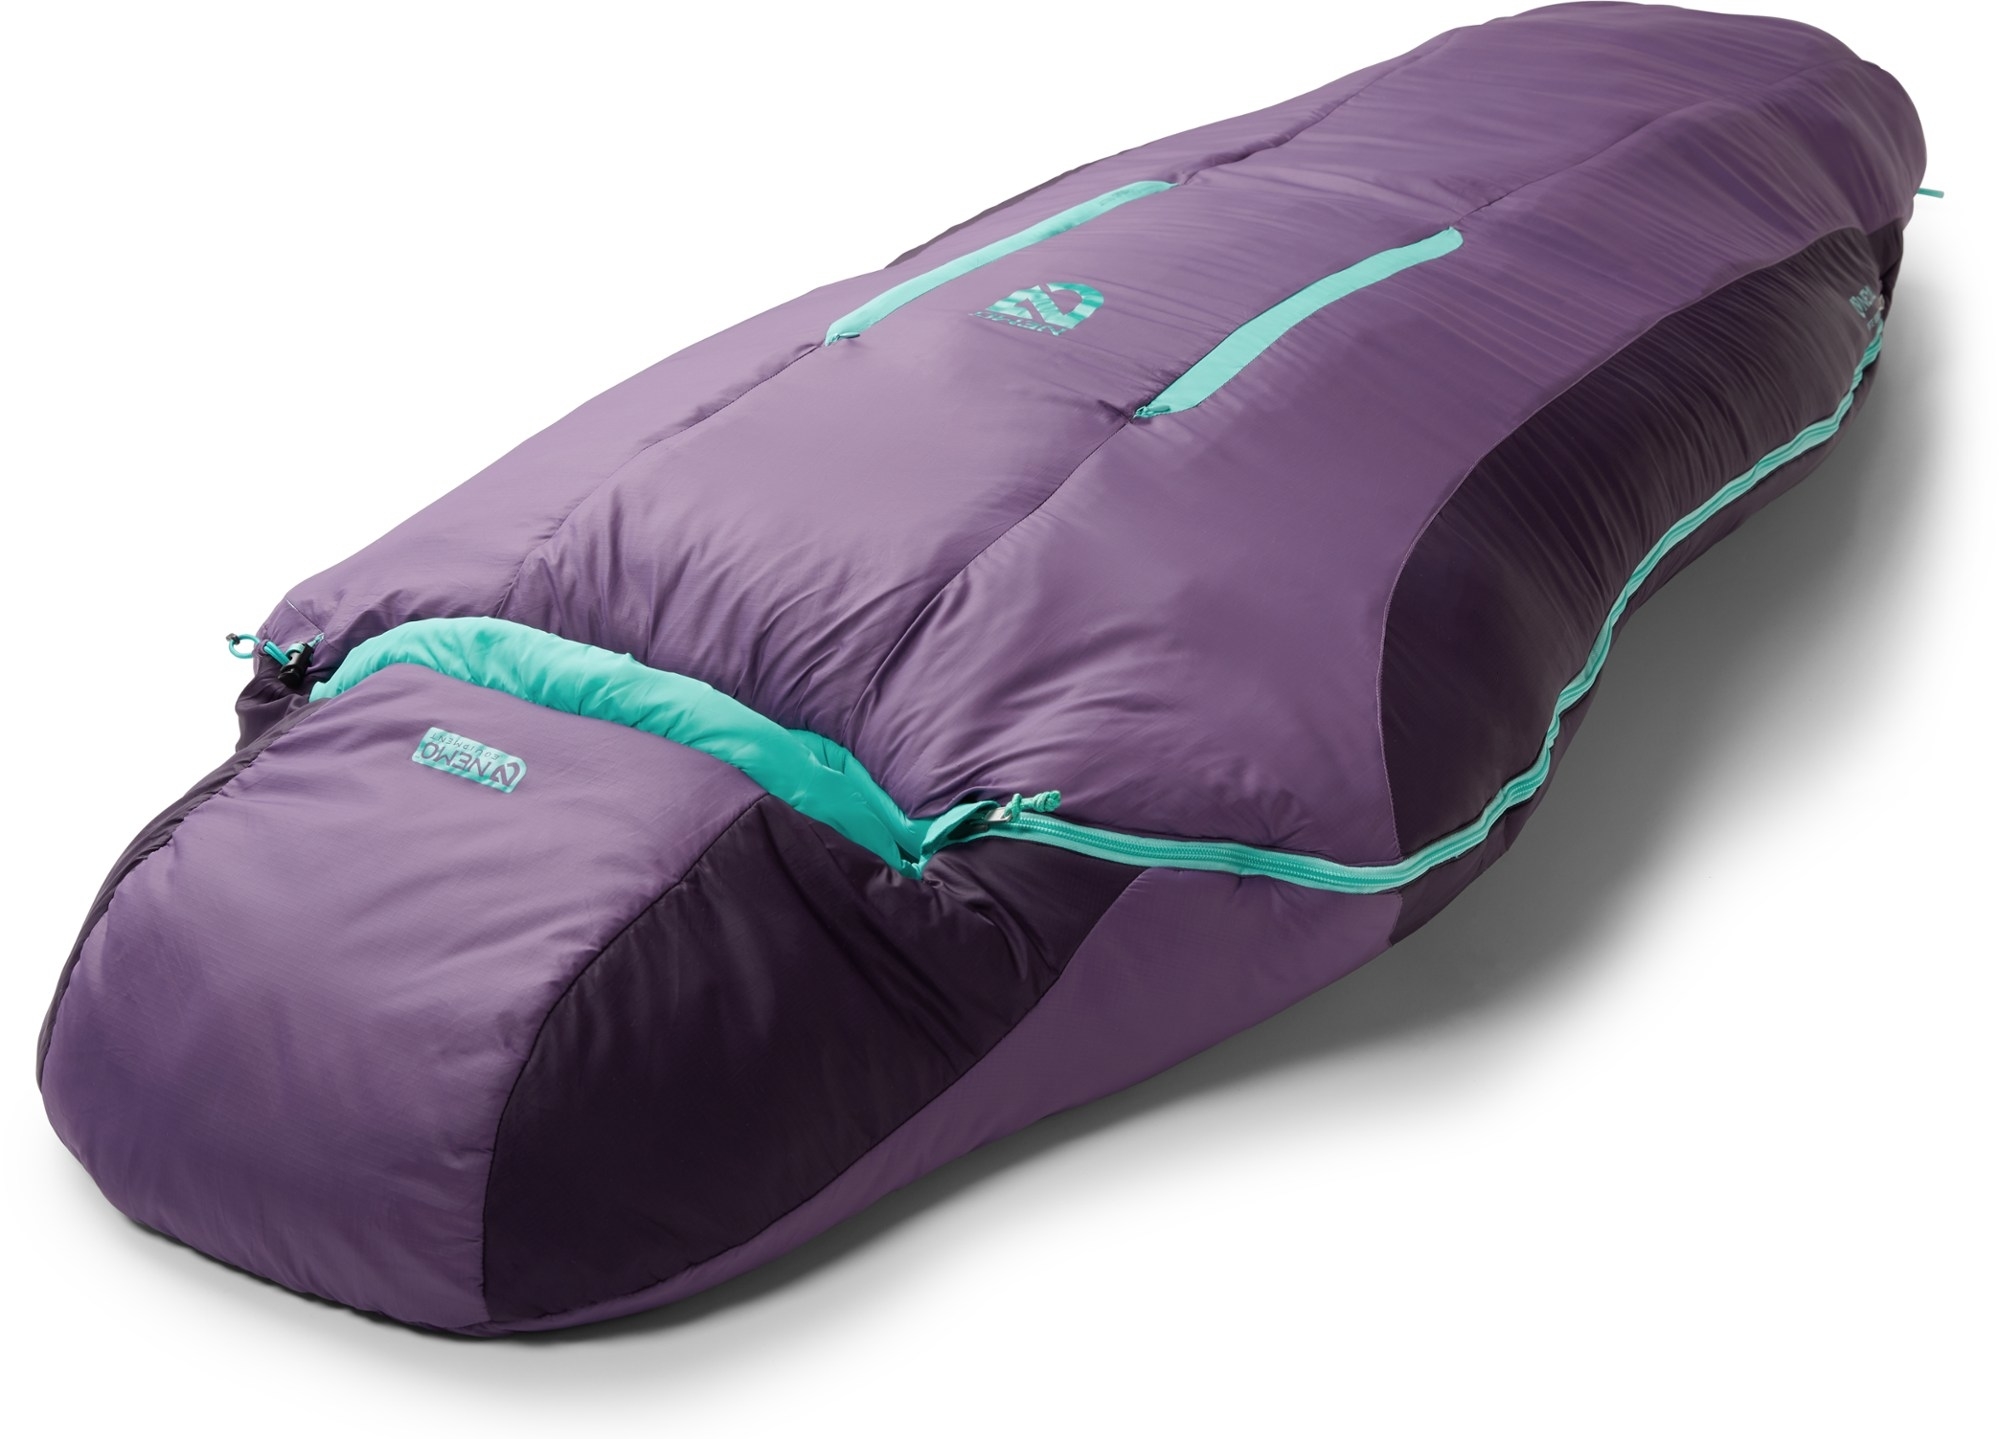 Mummy-style sleeping bag designed for warmth, with a zipper closure